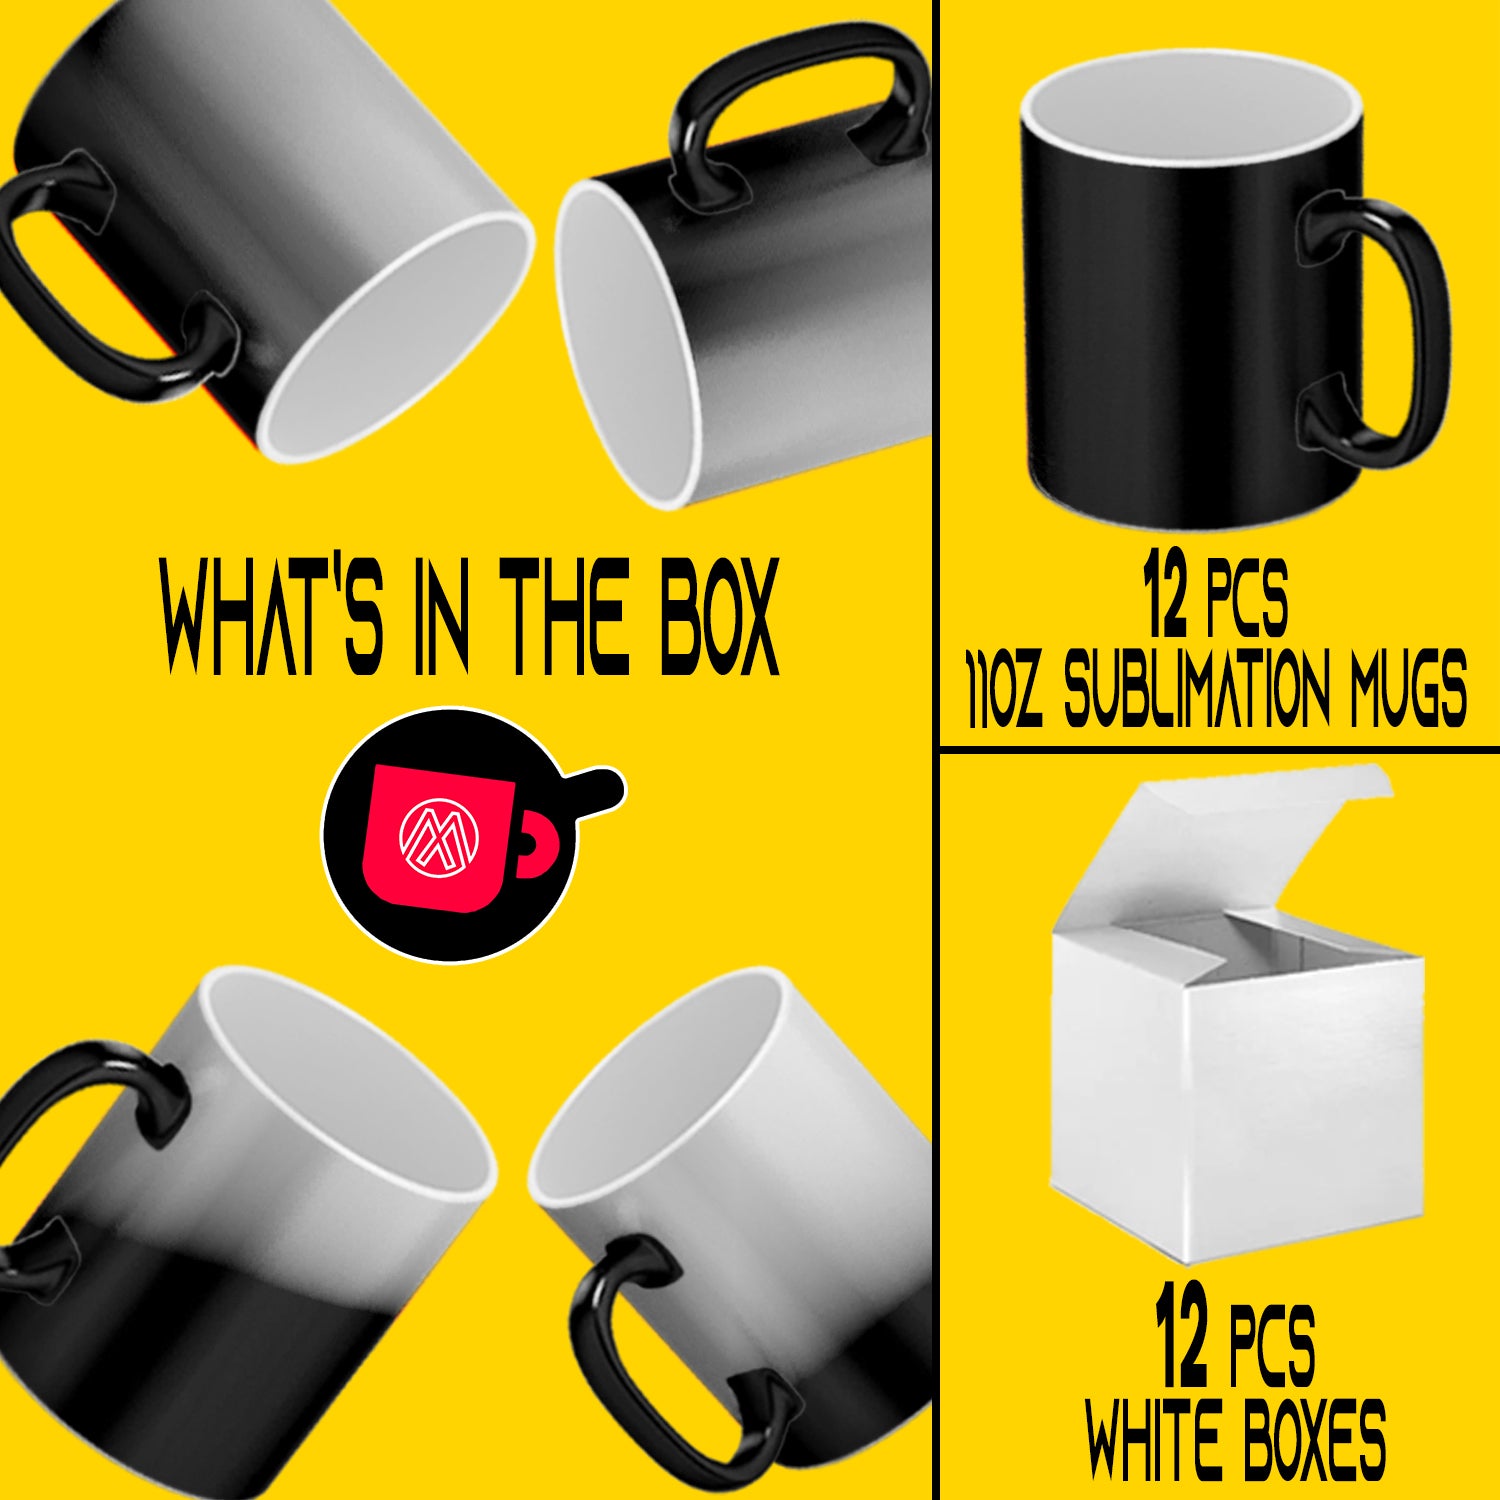 Box of 12 colored mugs inside and on handles for sublimation 11 oz SP